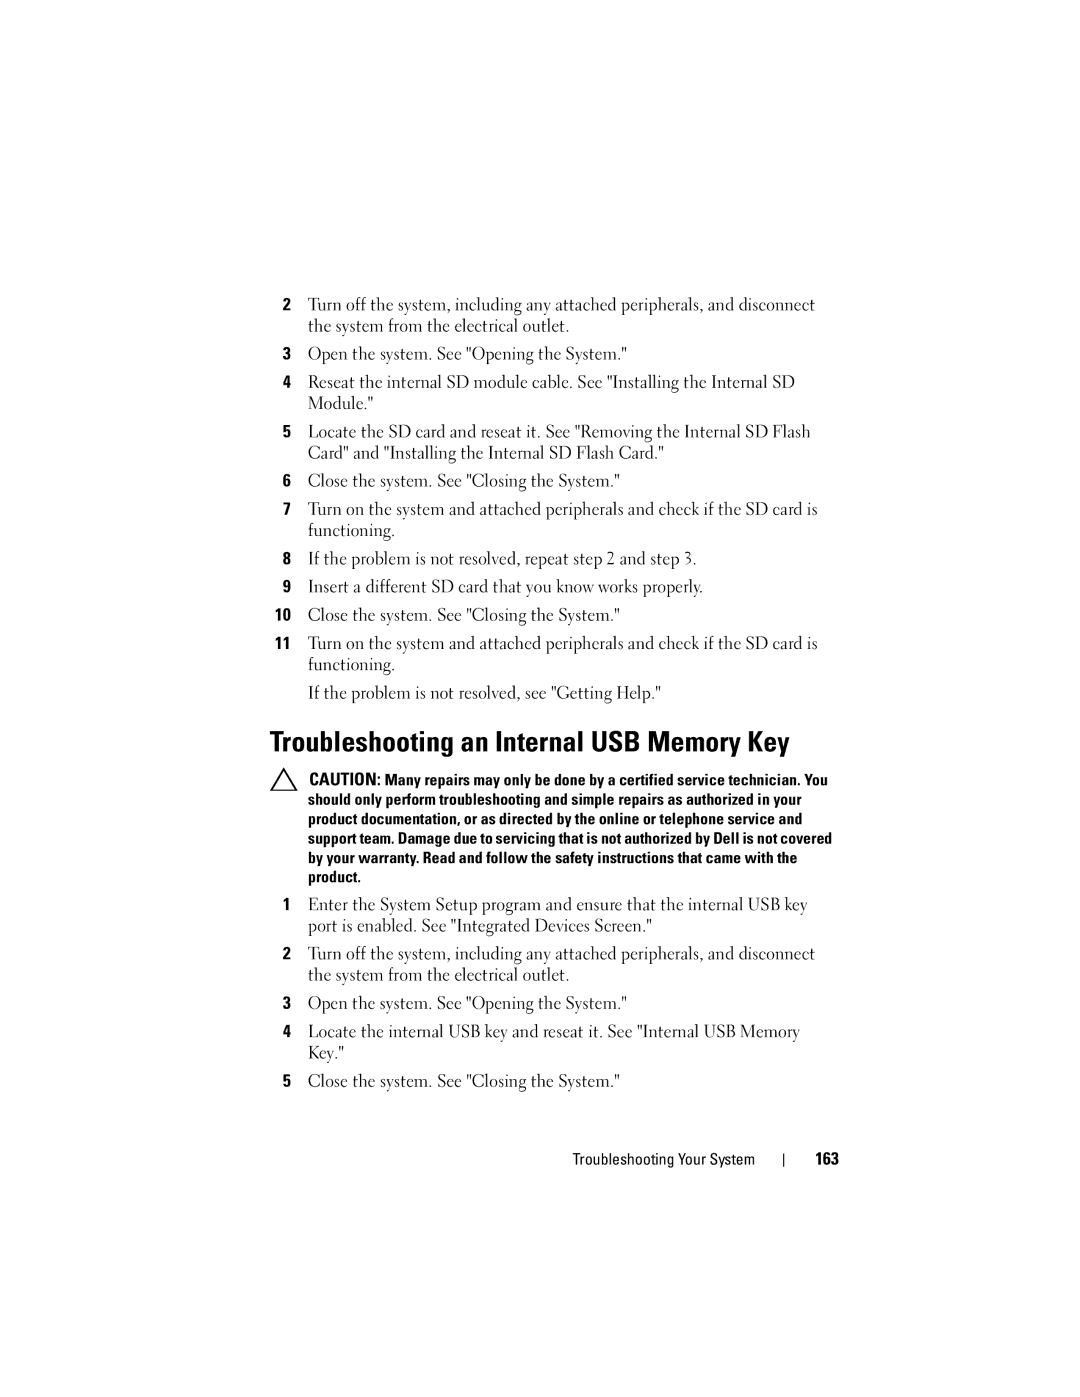 Dell R710 owner manual Troubleshooting an Internal USB Memory Key, 163 